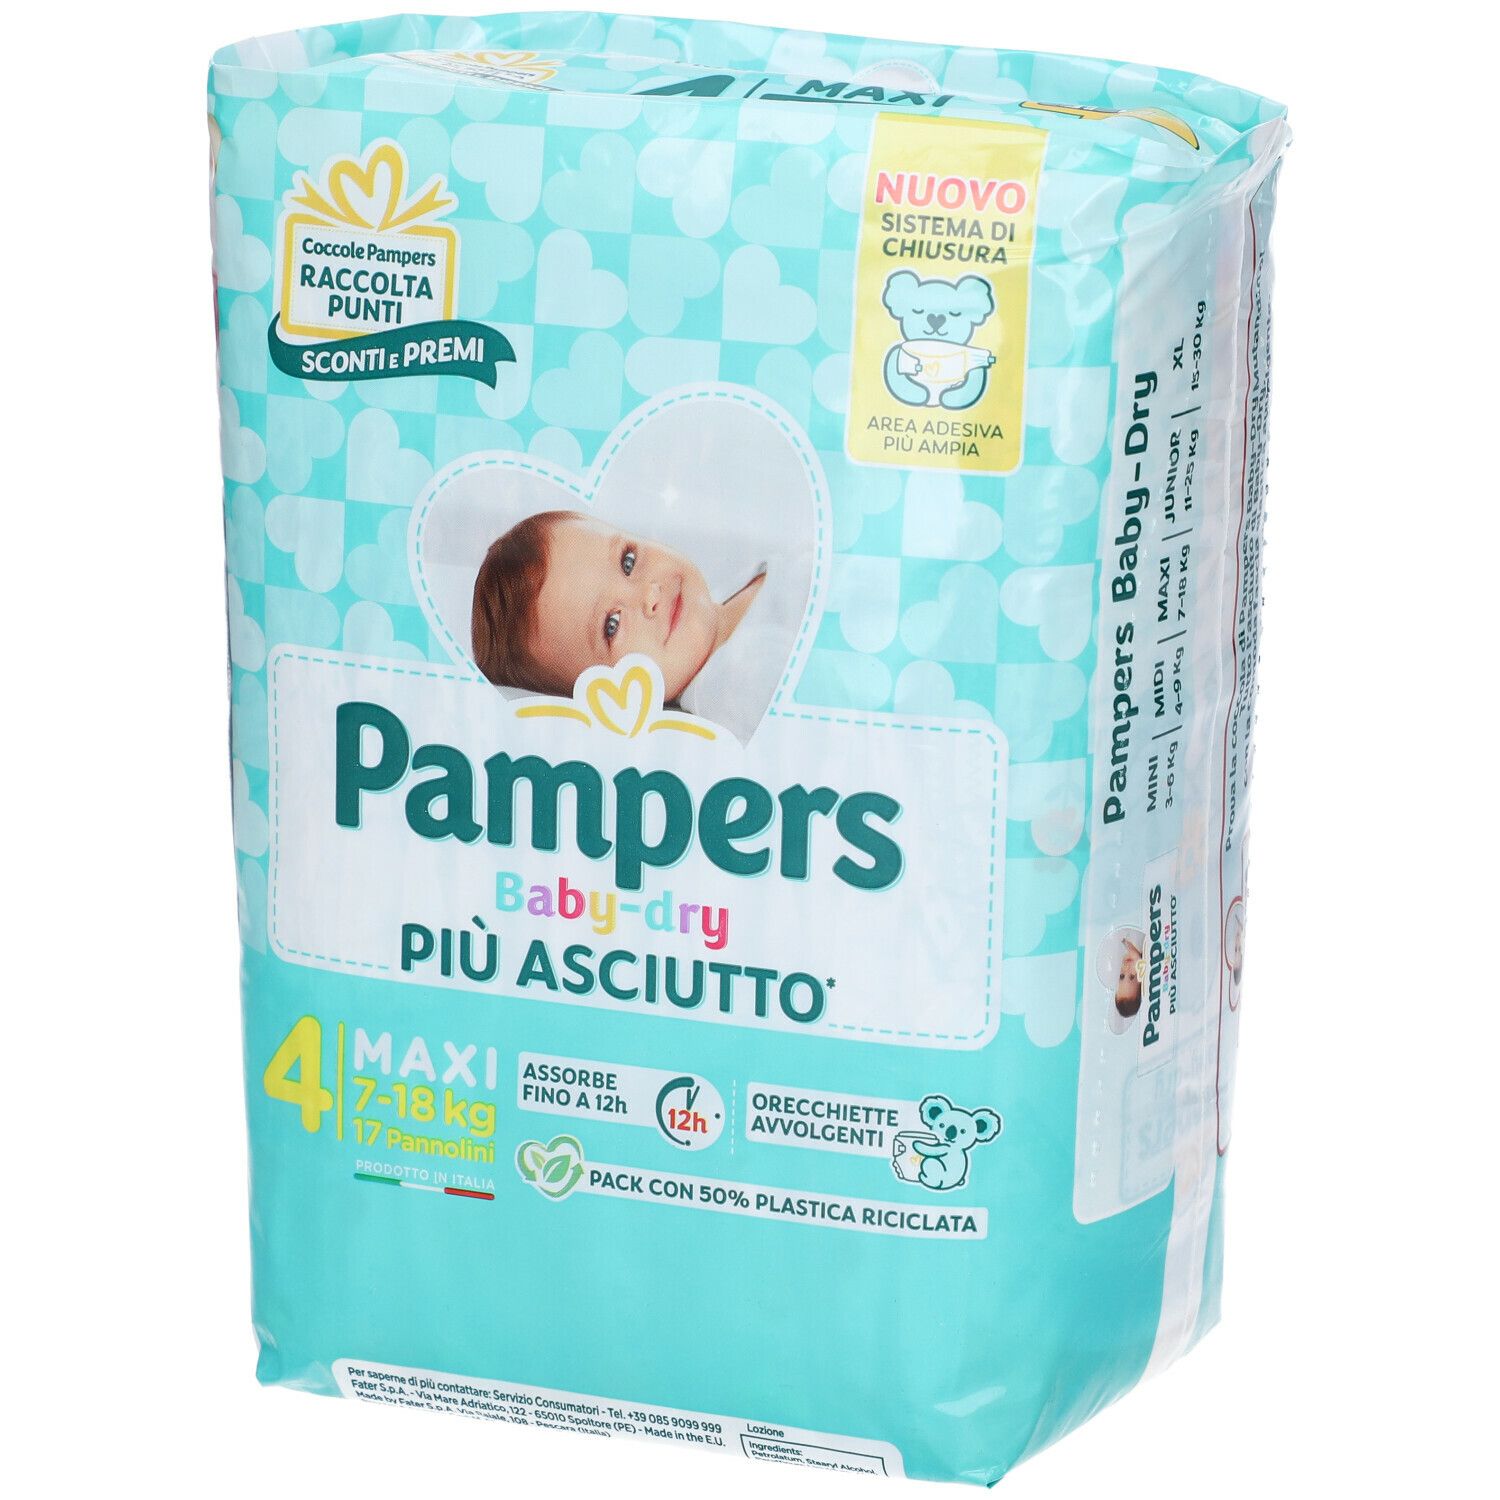 Image of Pampers Baby Dry 7/18kg